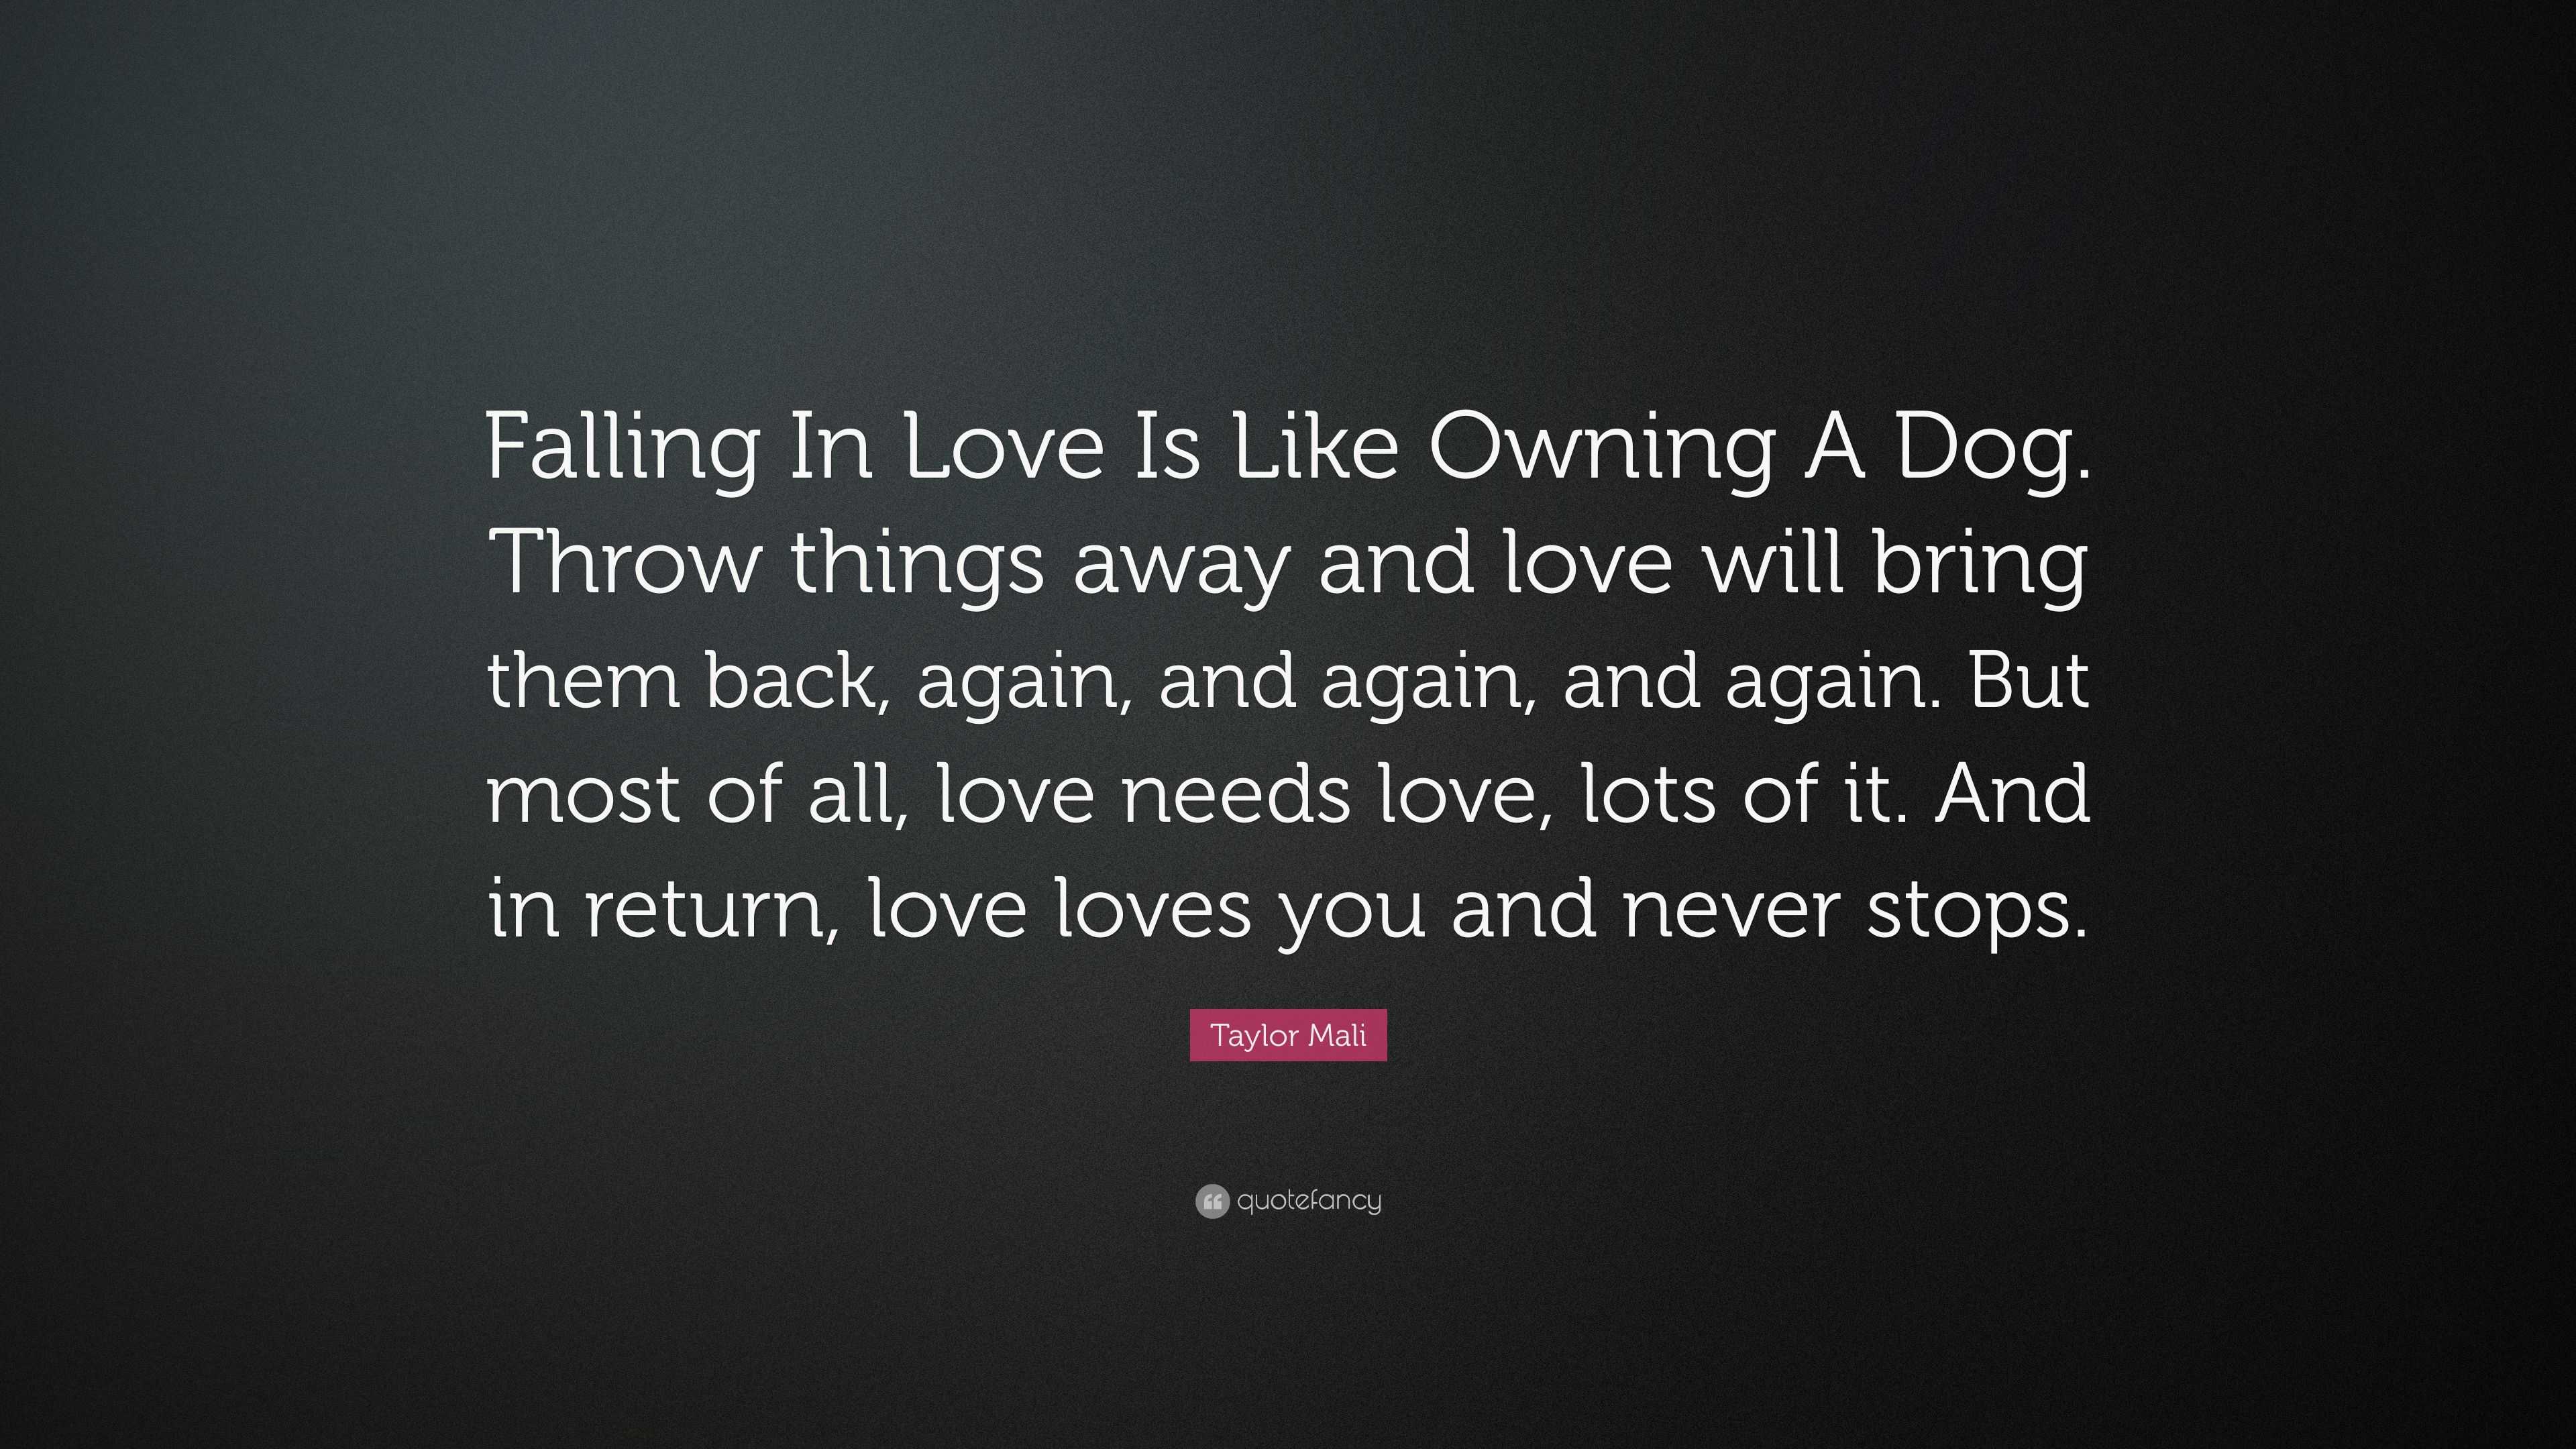 Love Like A Dog Quote | Love quotes collection within HD images